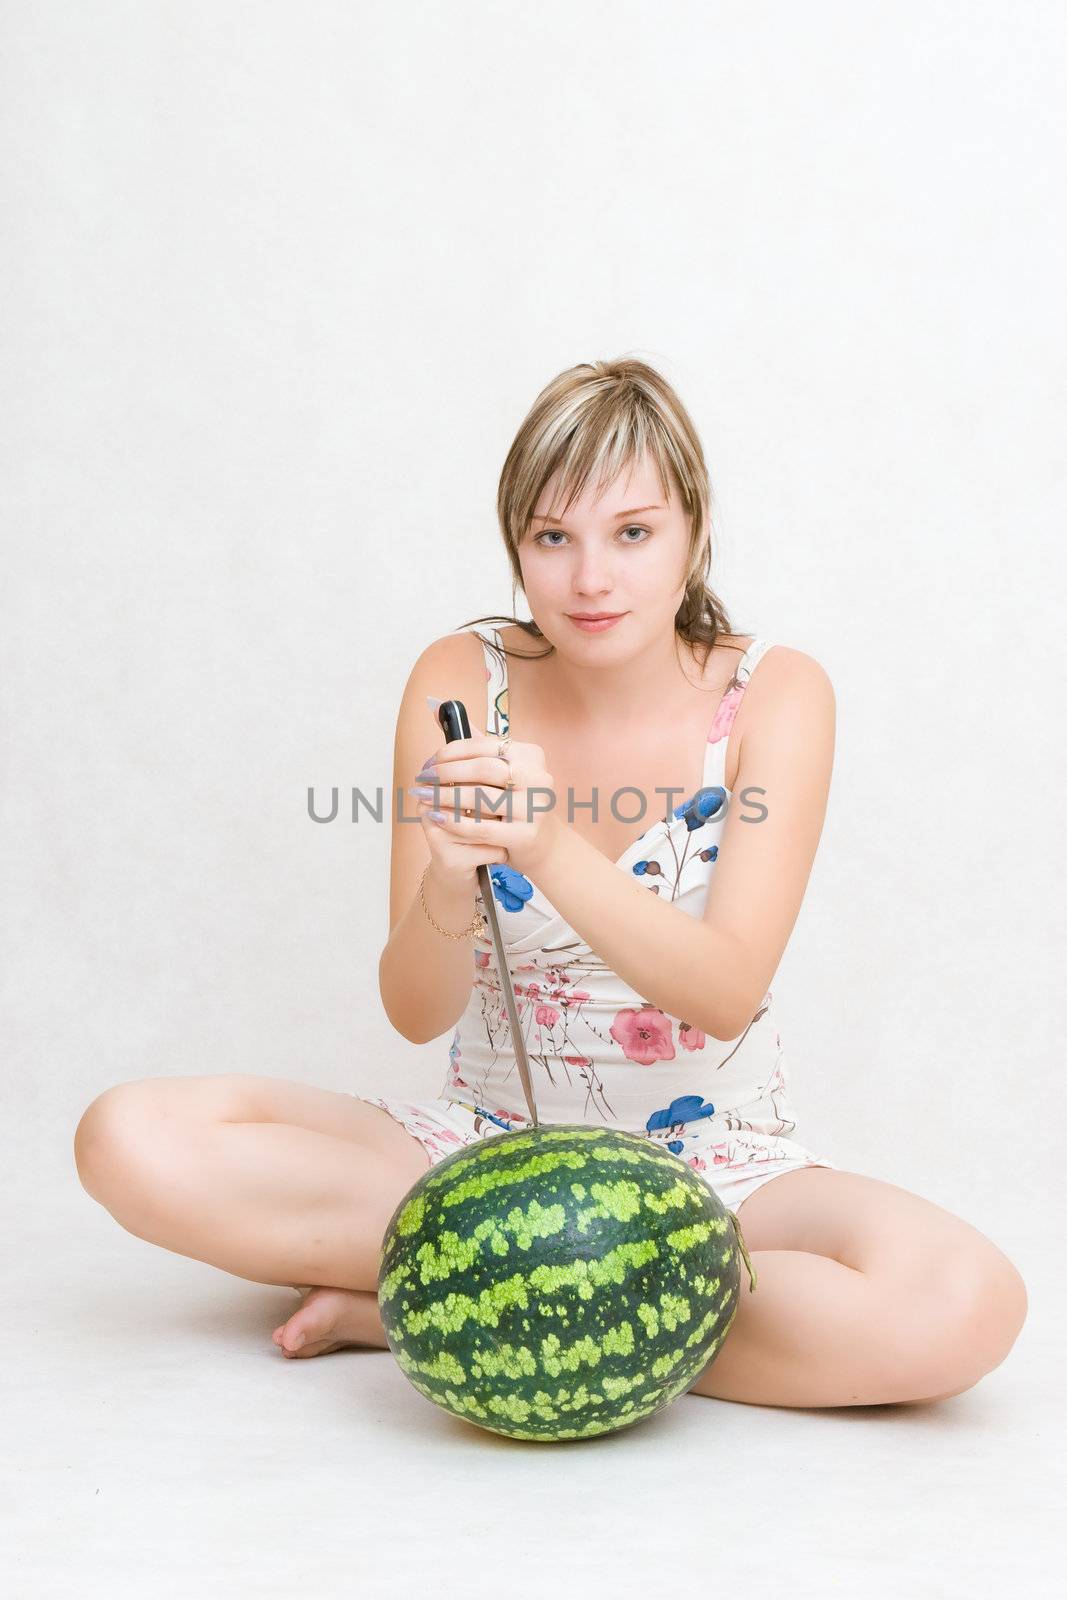 Girl, knife and water melon by vsurkov